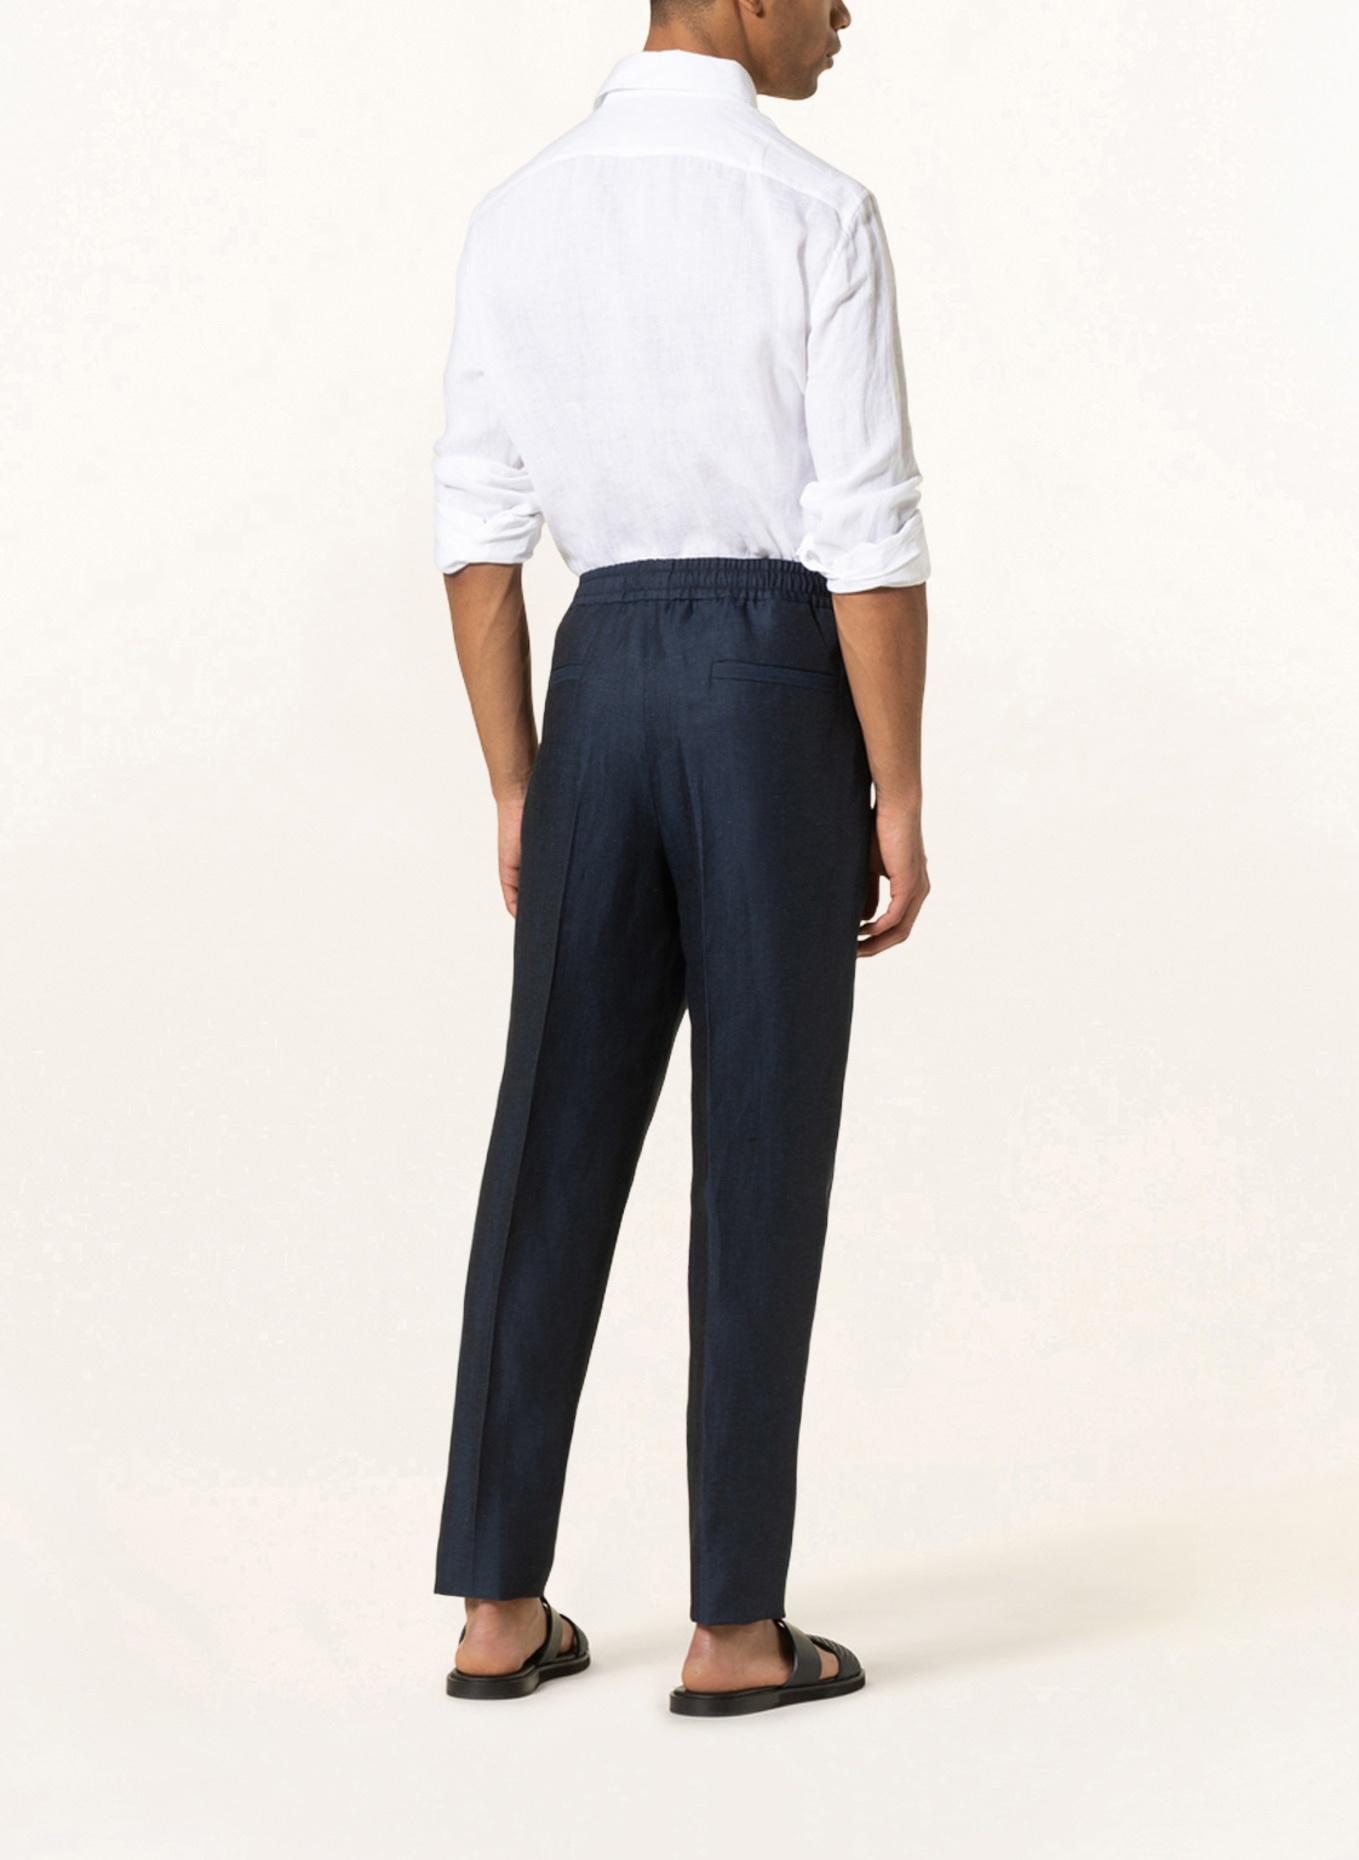 ZEGNA Pants in jogger style with linen, Color: DARK BLUE (Image 3)